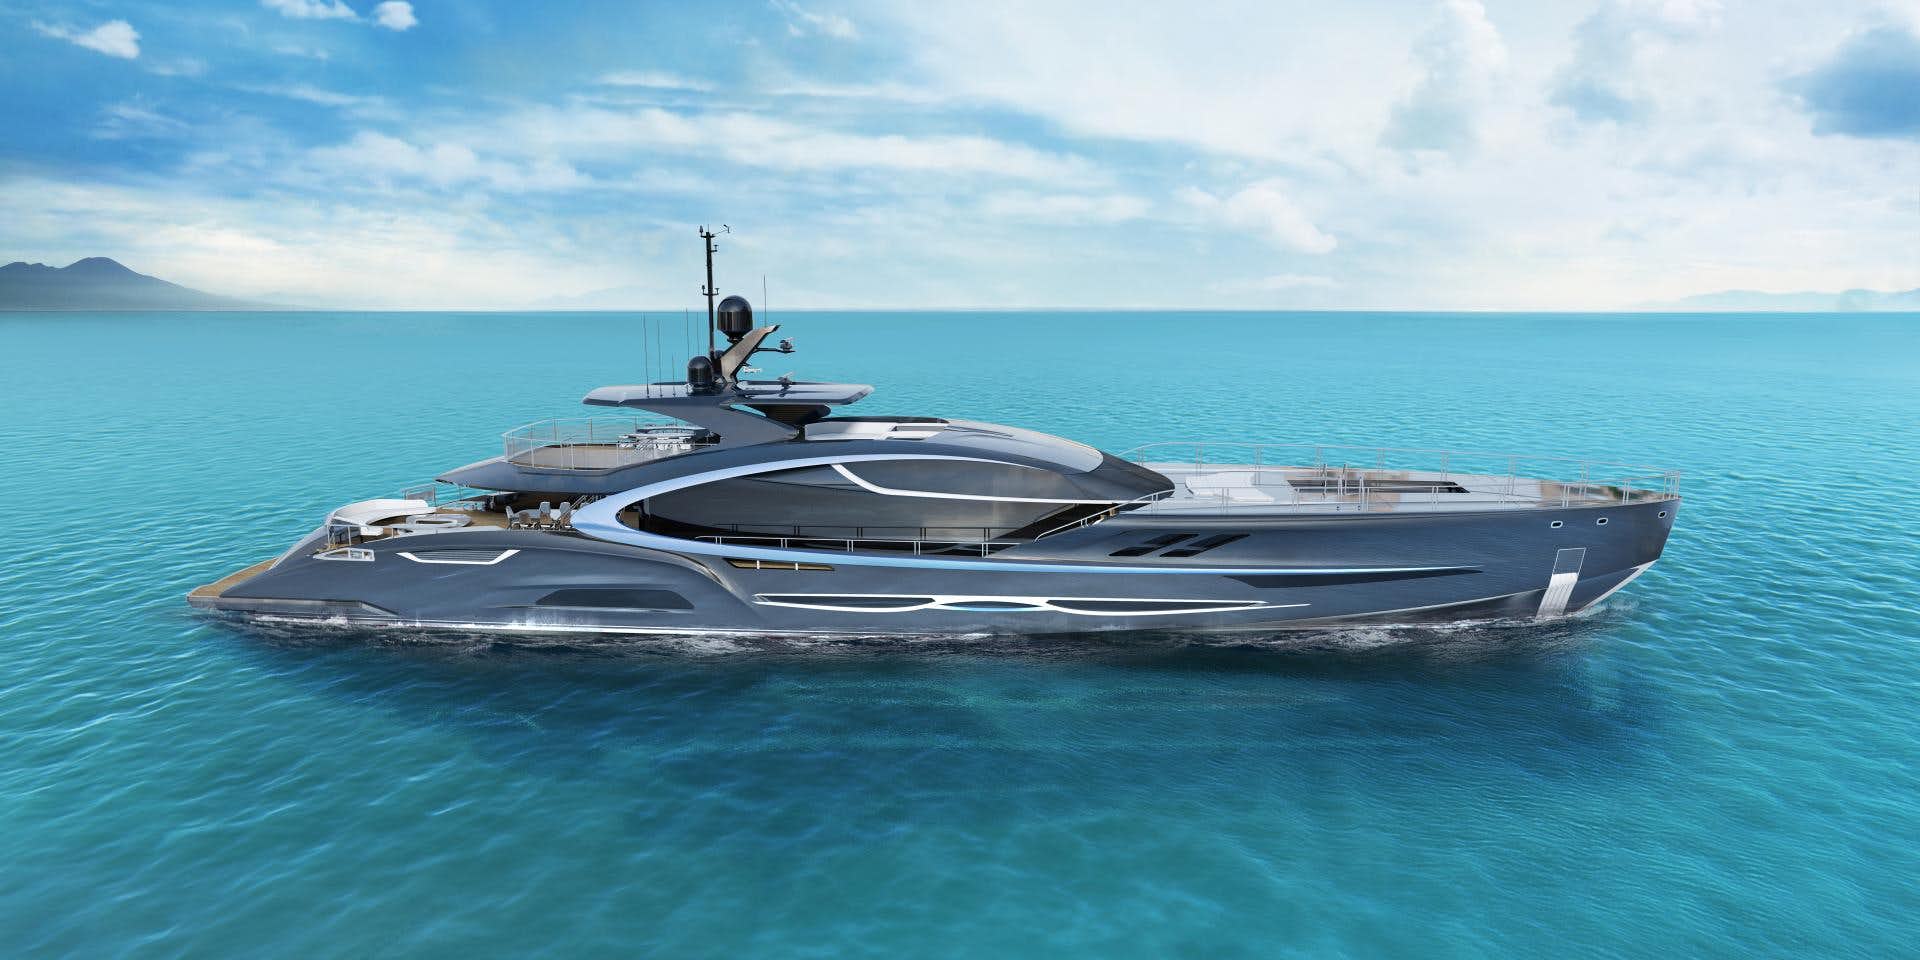 Zeon
Yacht for Sale